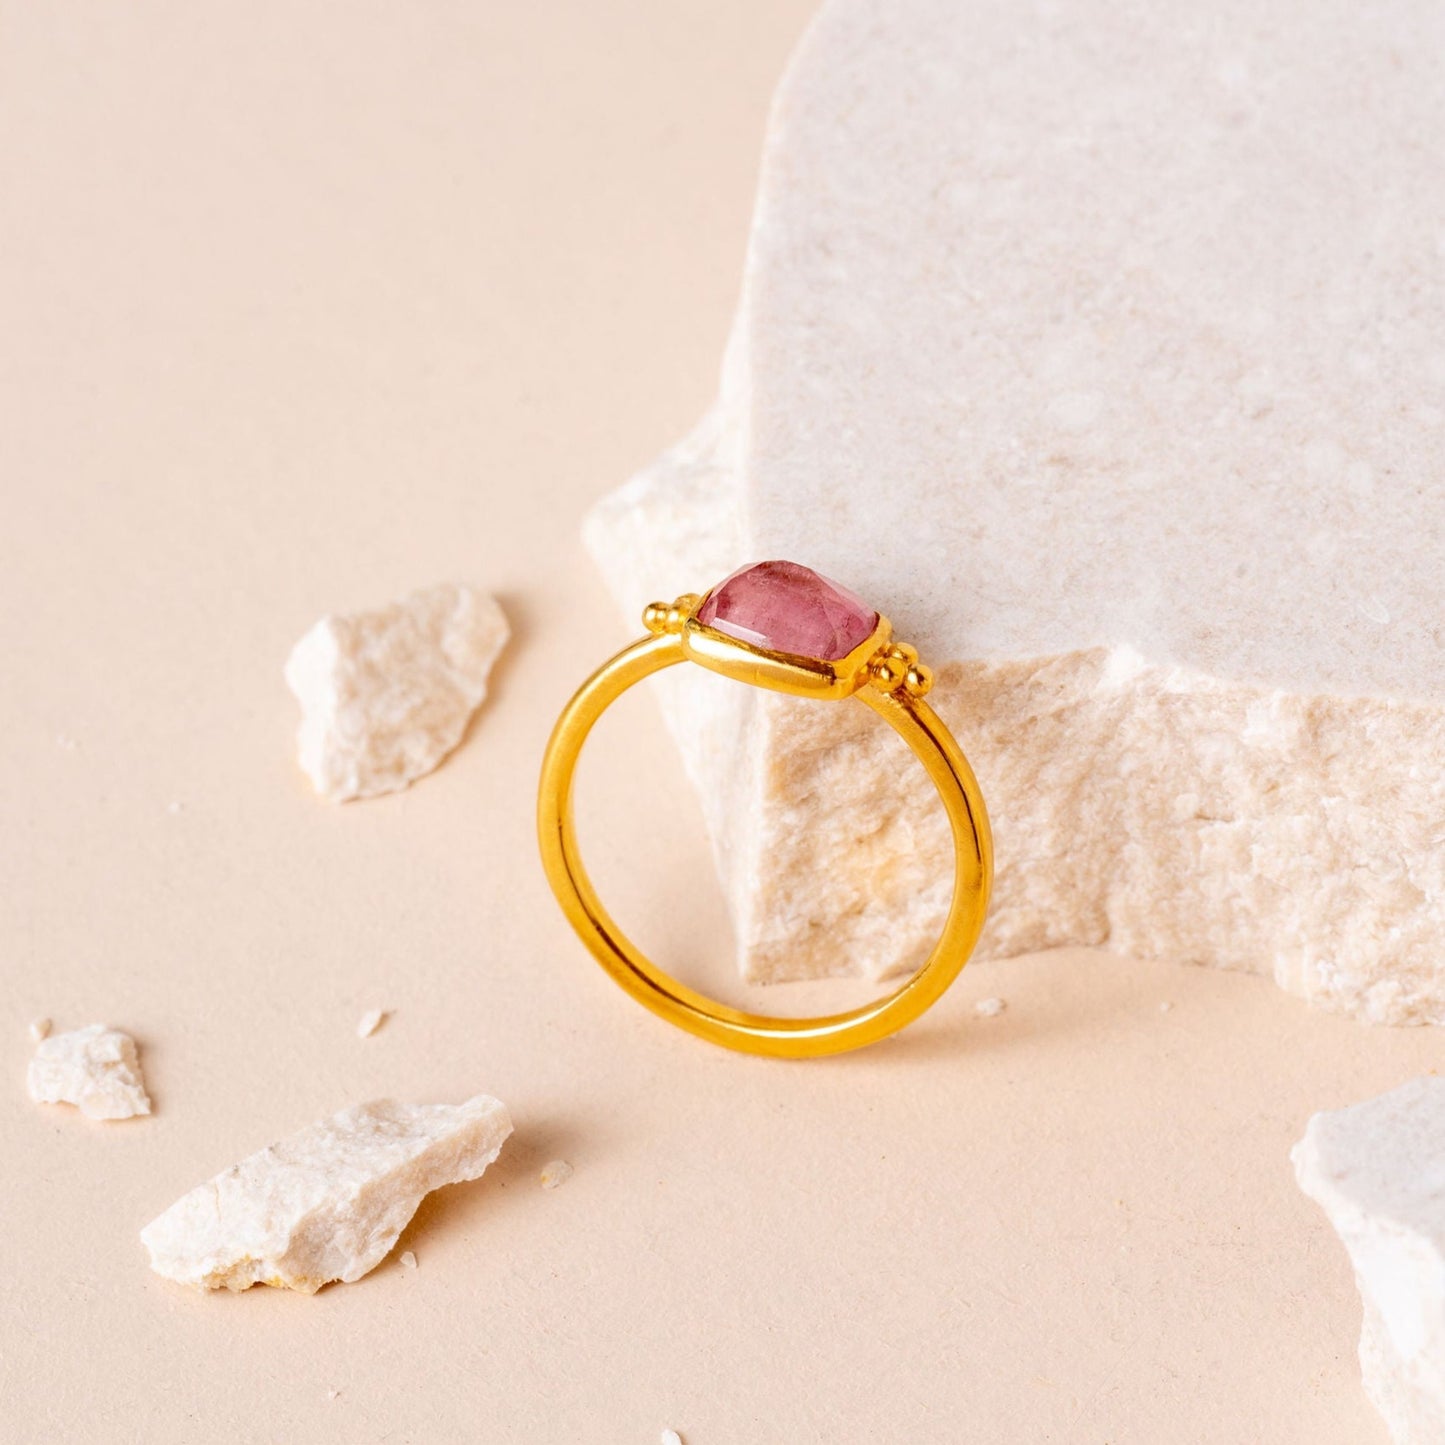 Artisan-crafted gold ring with fine granulation details and a lovely hand-cut light pink tourmaline.